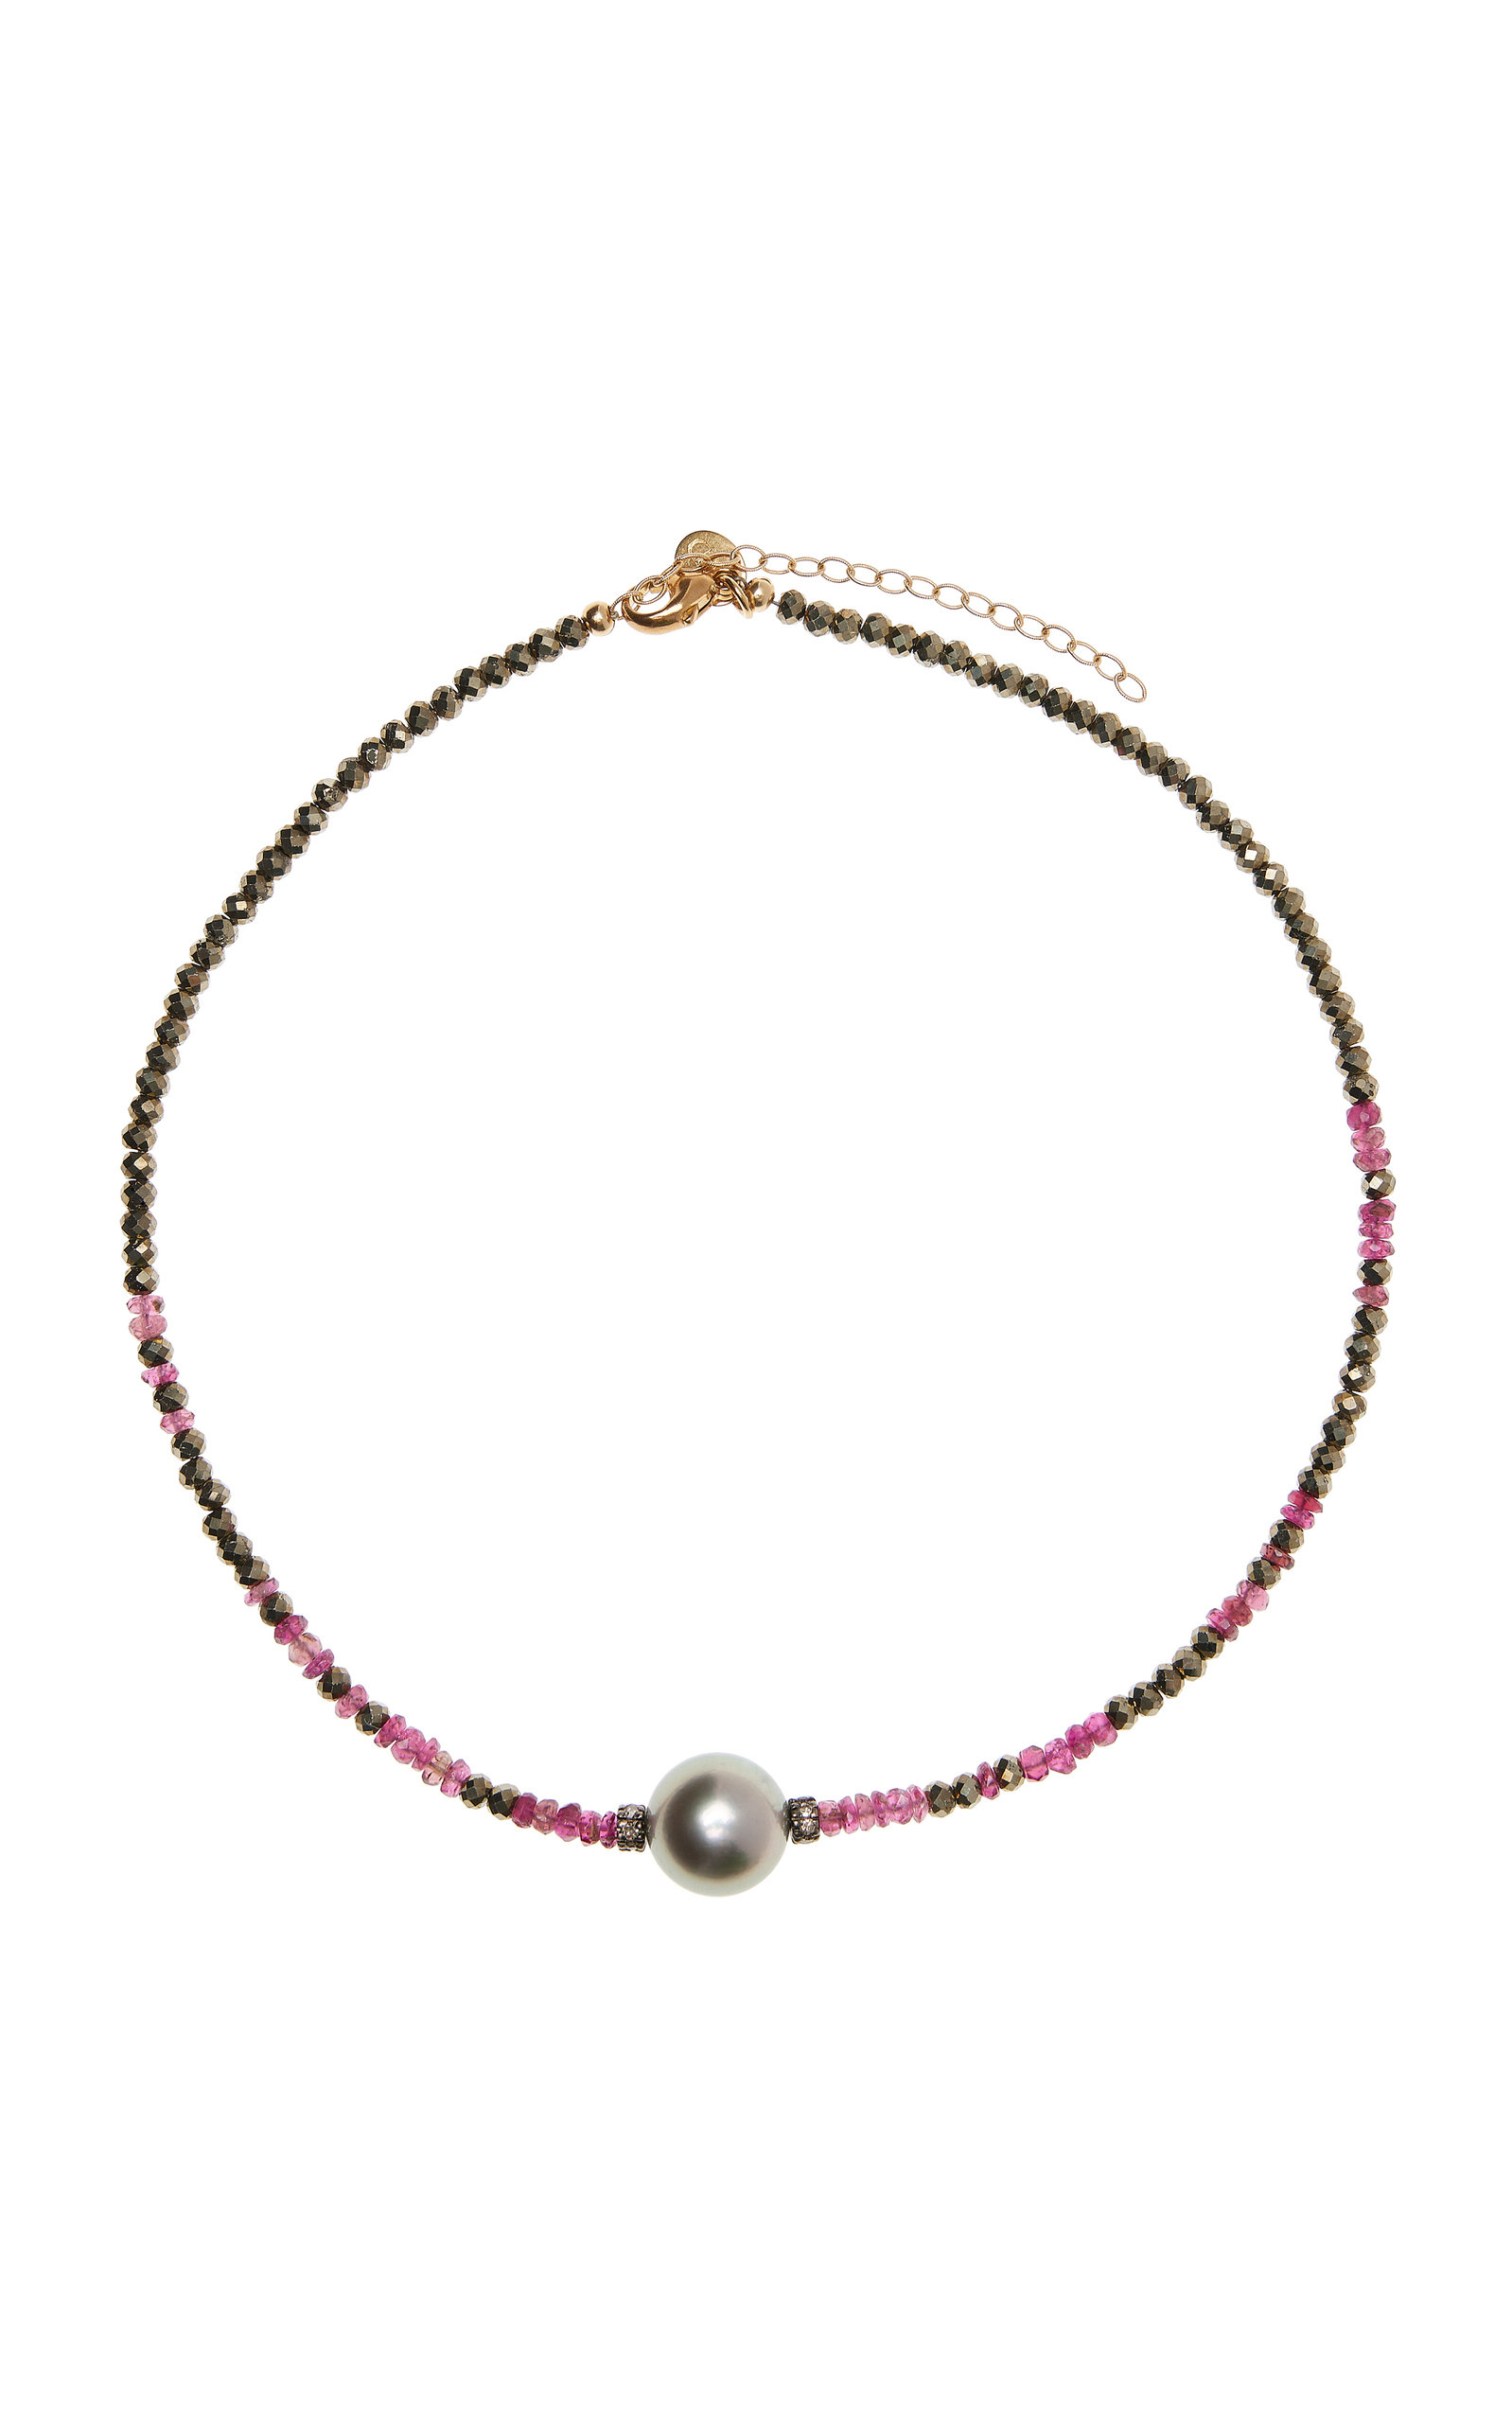 Joie DiGiovanni Women's Pink Tourmaline Ombre Single Tahitian Pearl Necklace